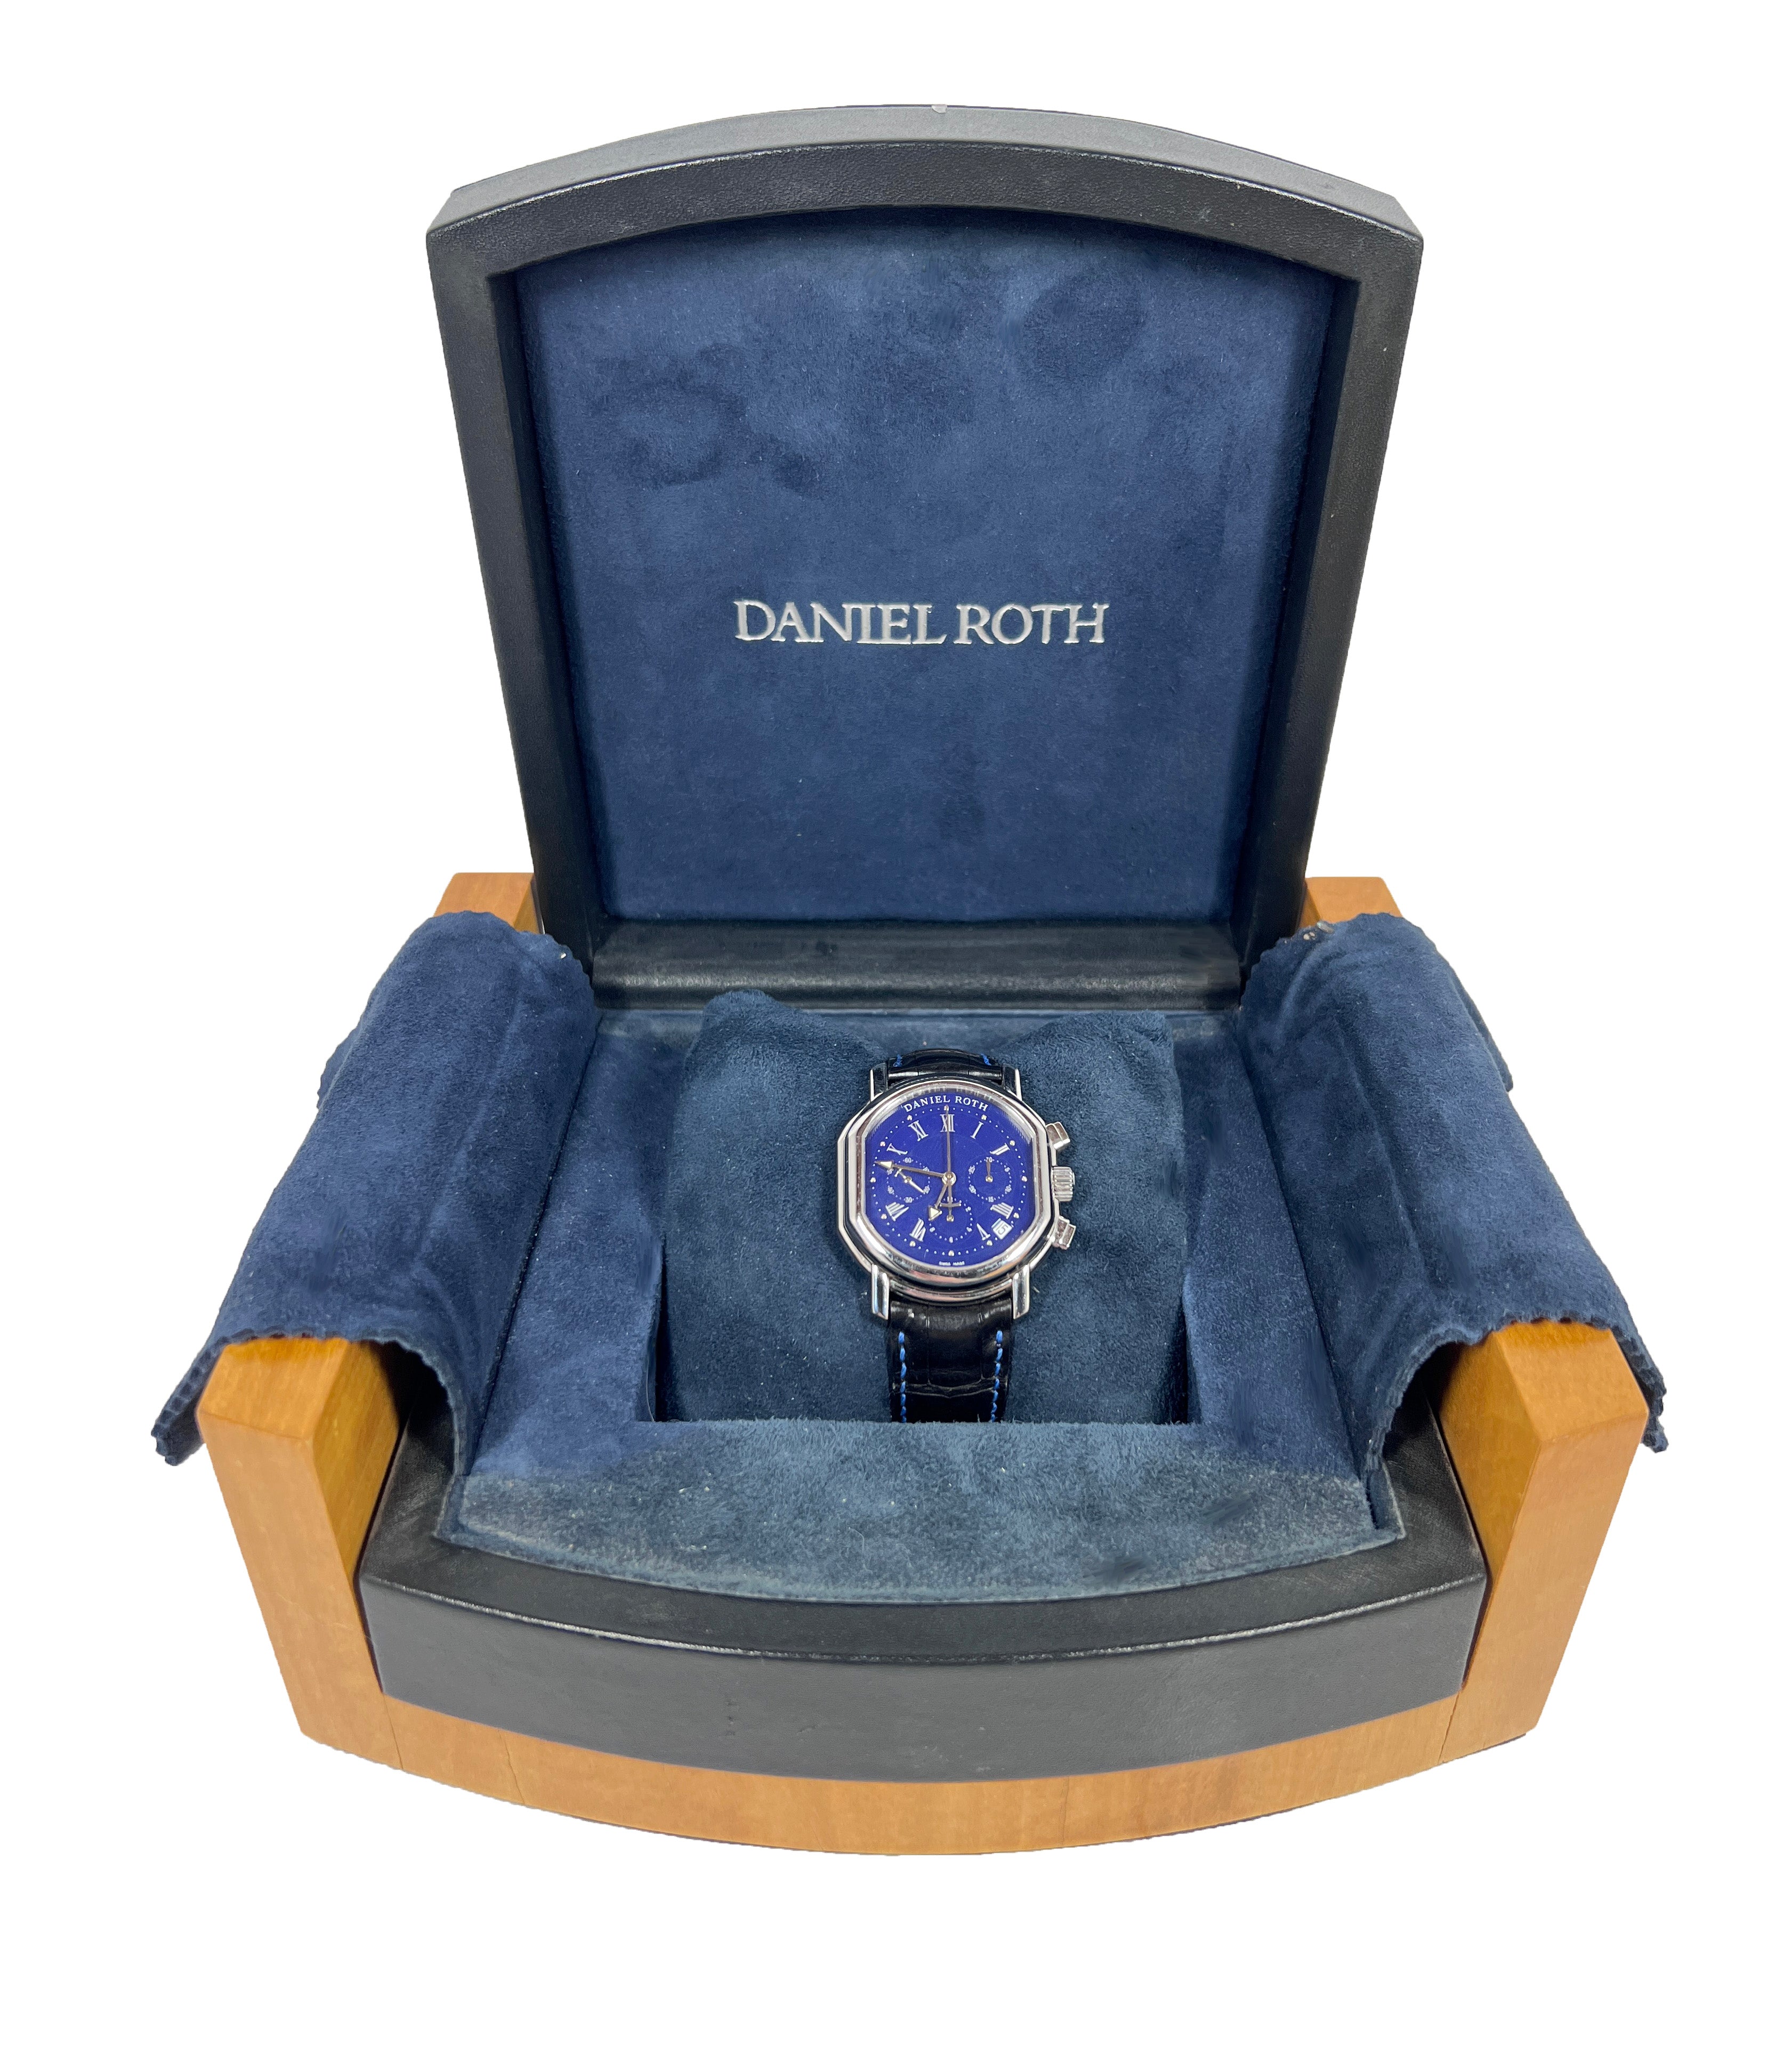 Daniel Roth Masters Chronograph Stainless Steel Men's Watch